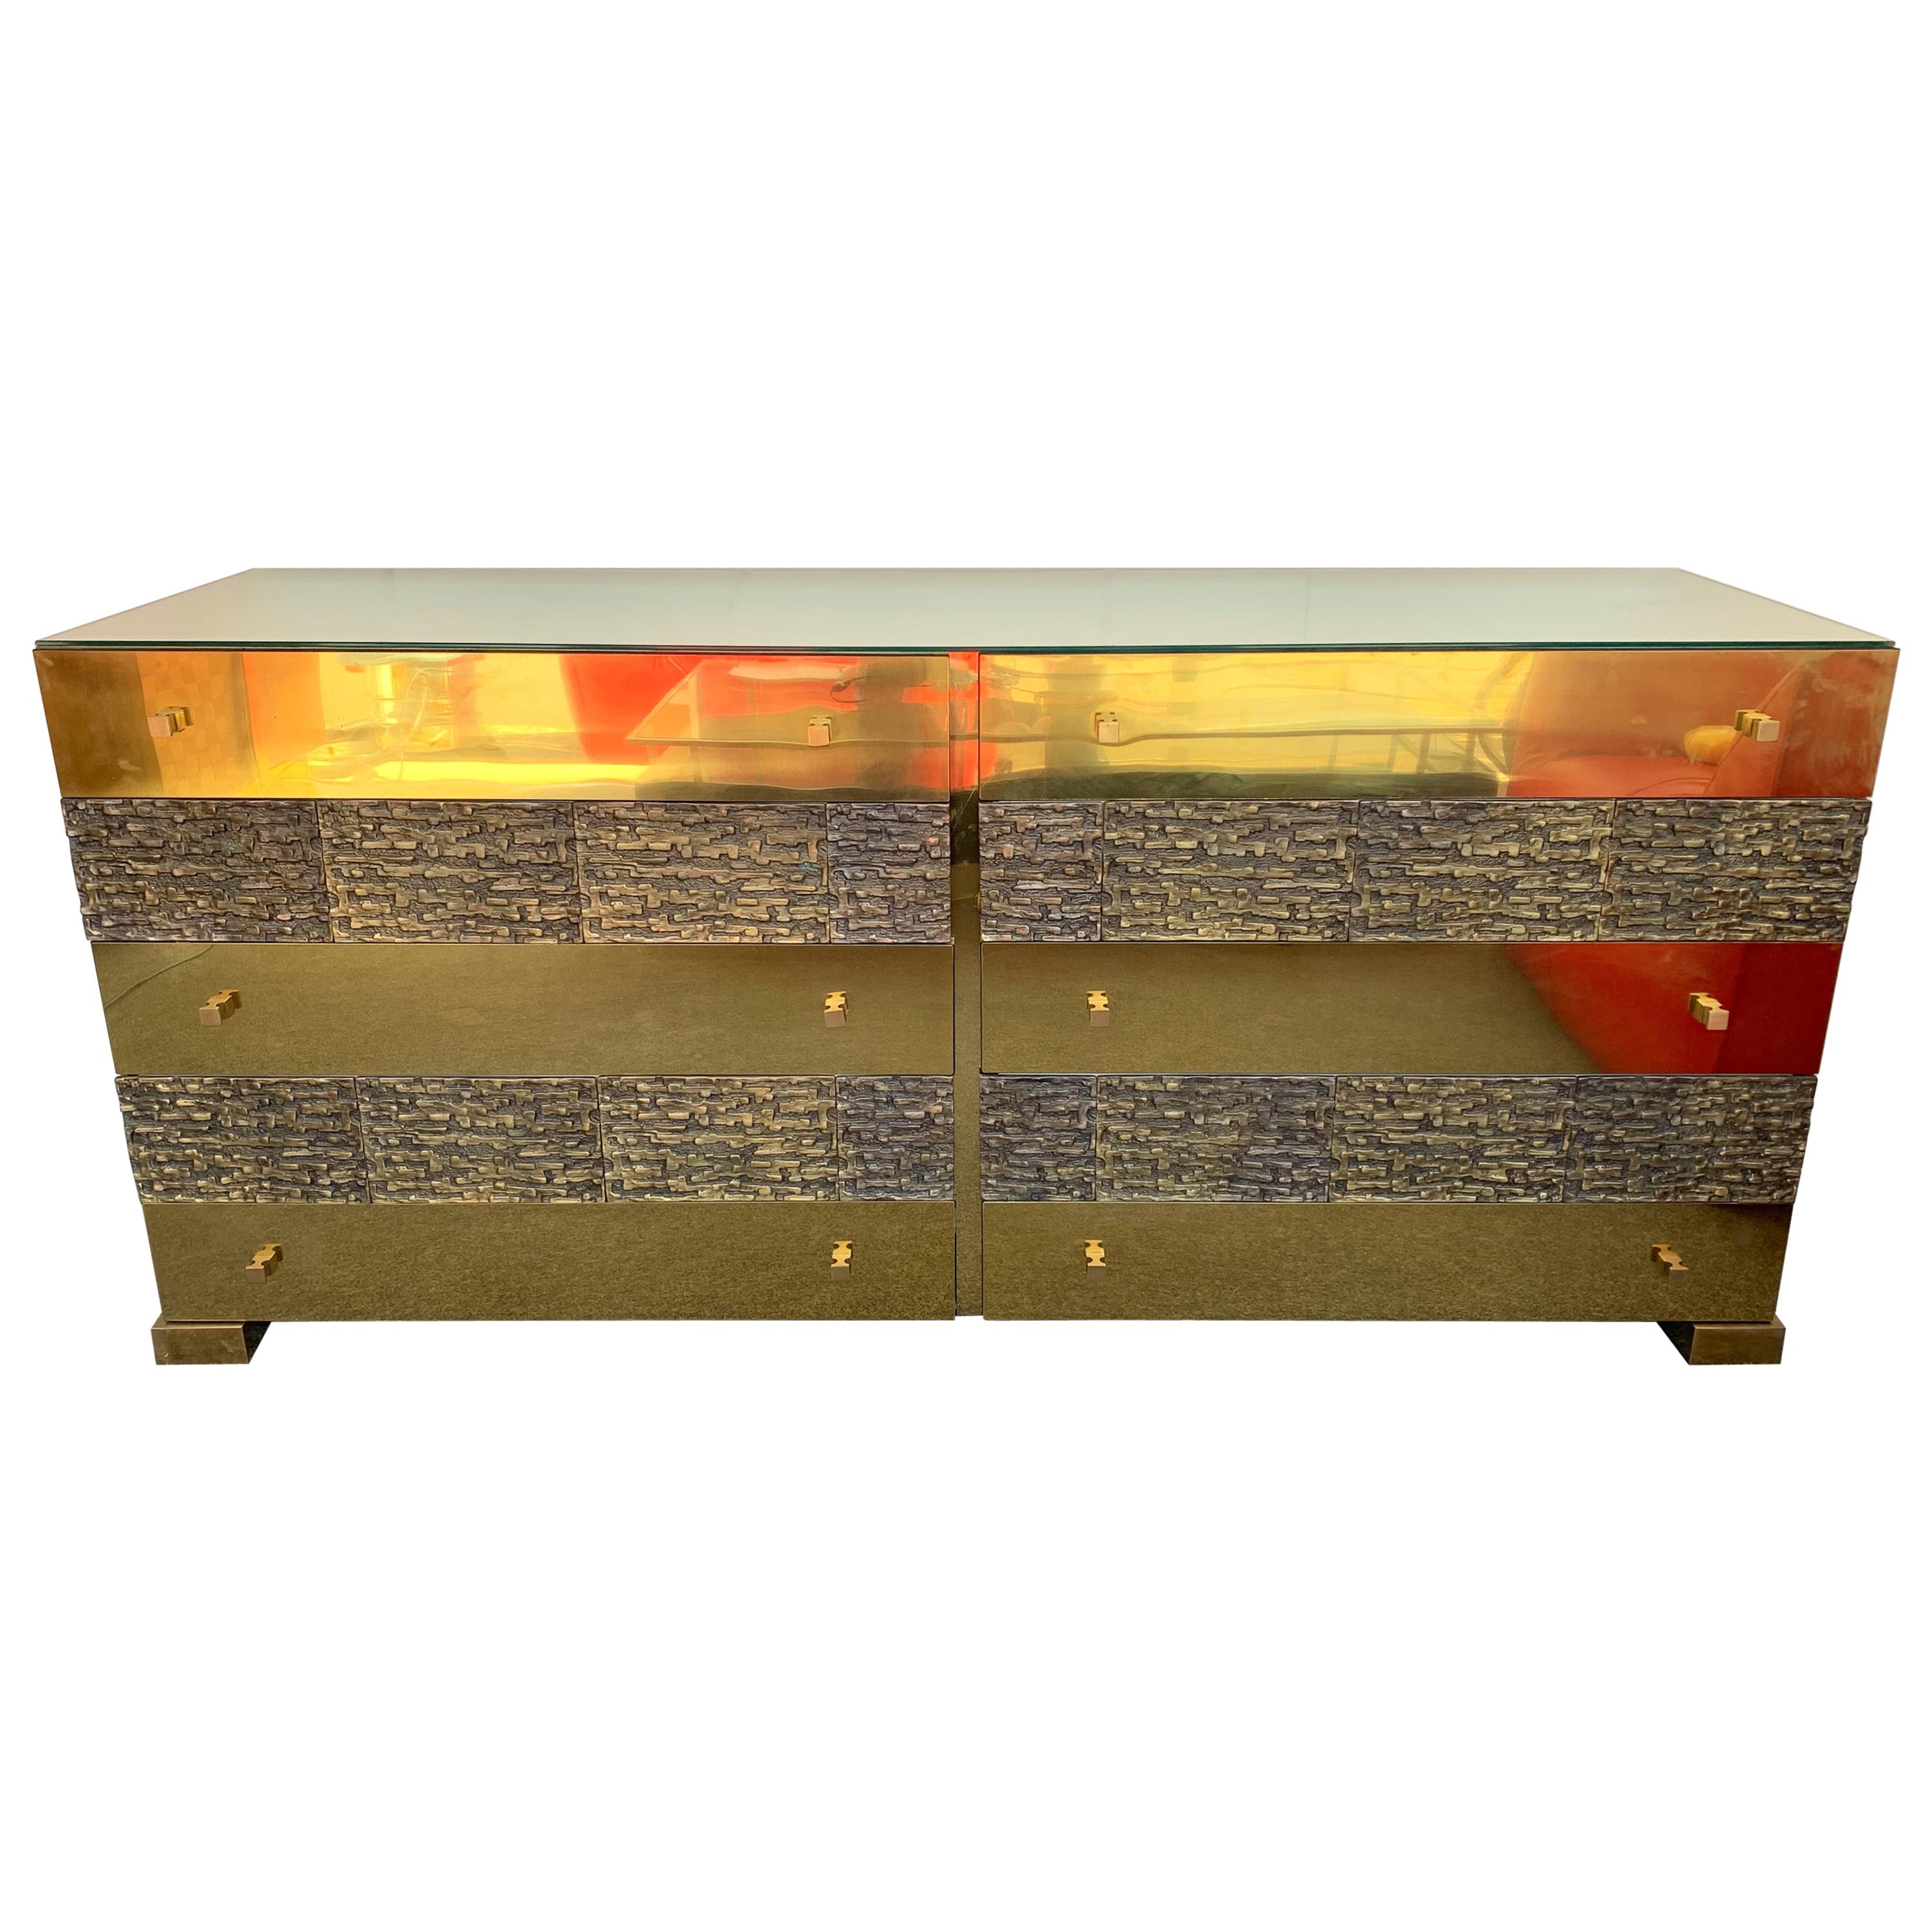 Brass and Bronze Sideboard Dresser by Luciano Frigerio. Italy, 1970s